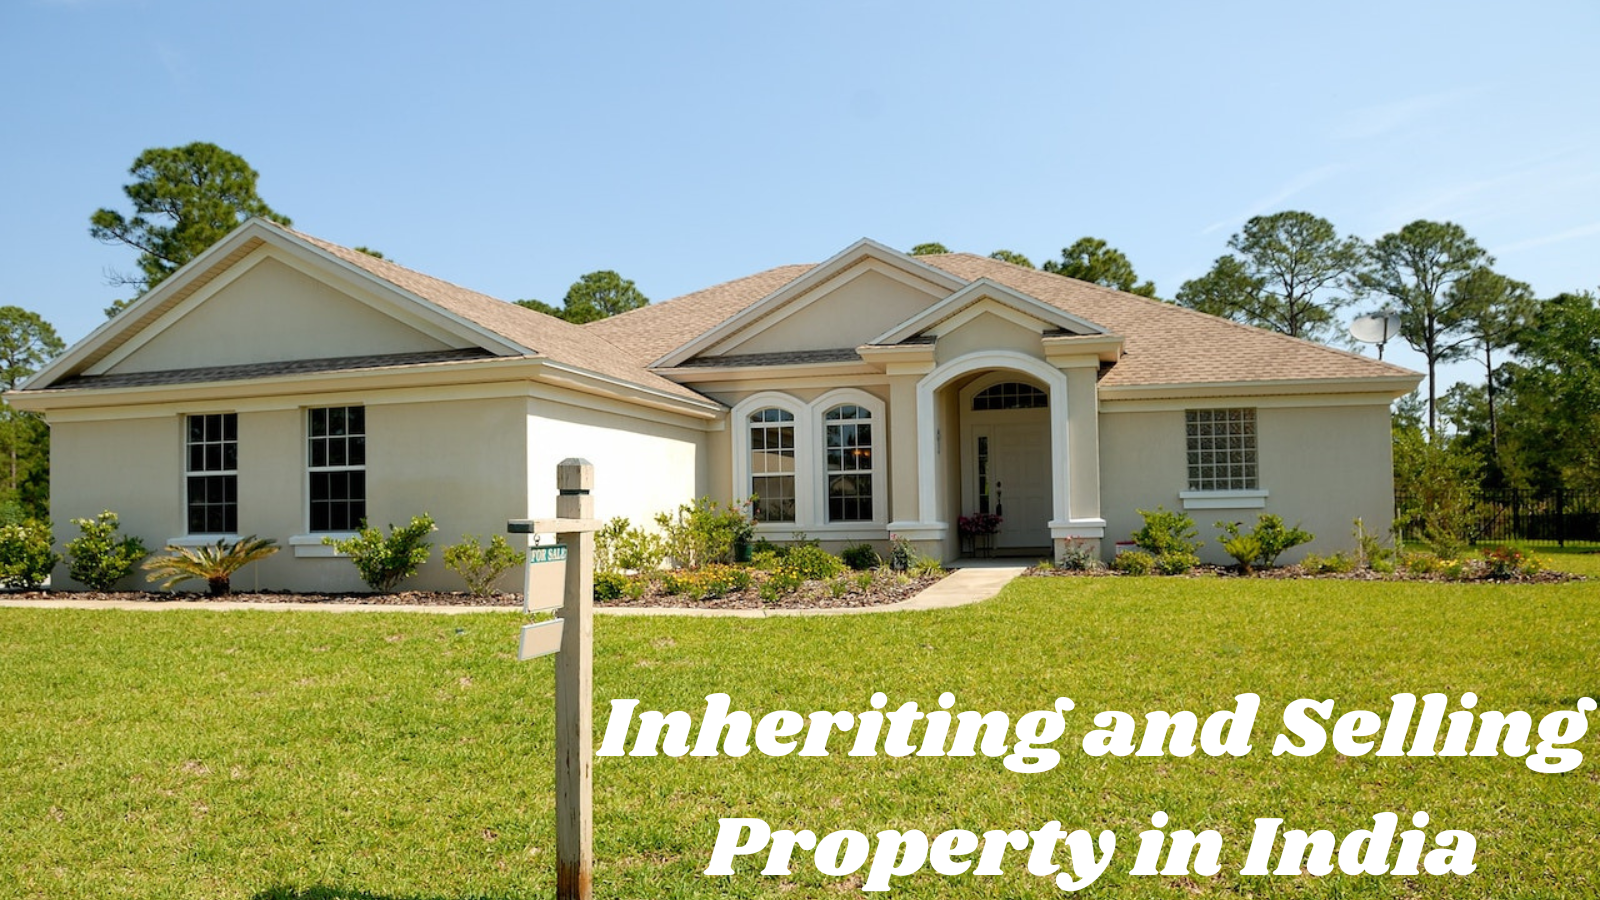 Inheriting and Selling Property in India